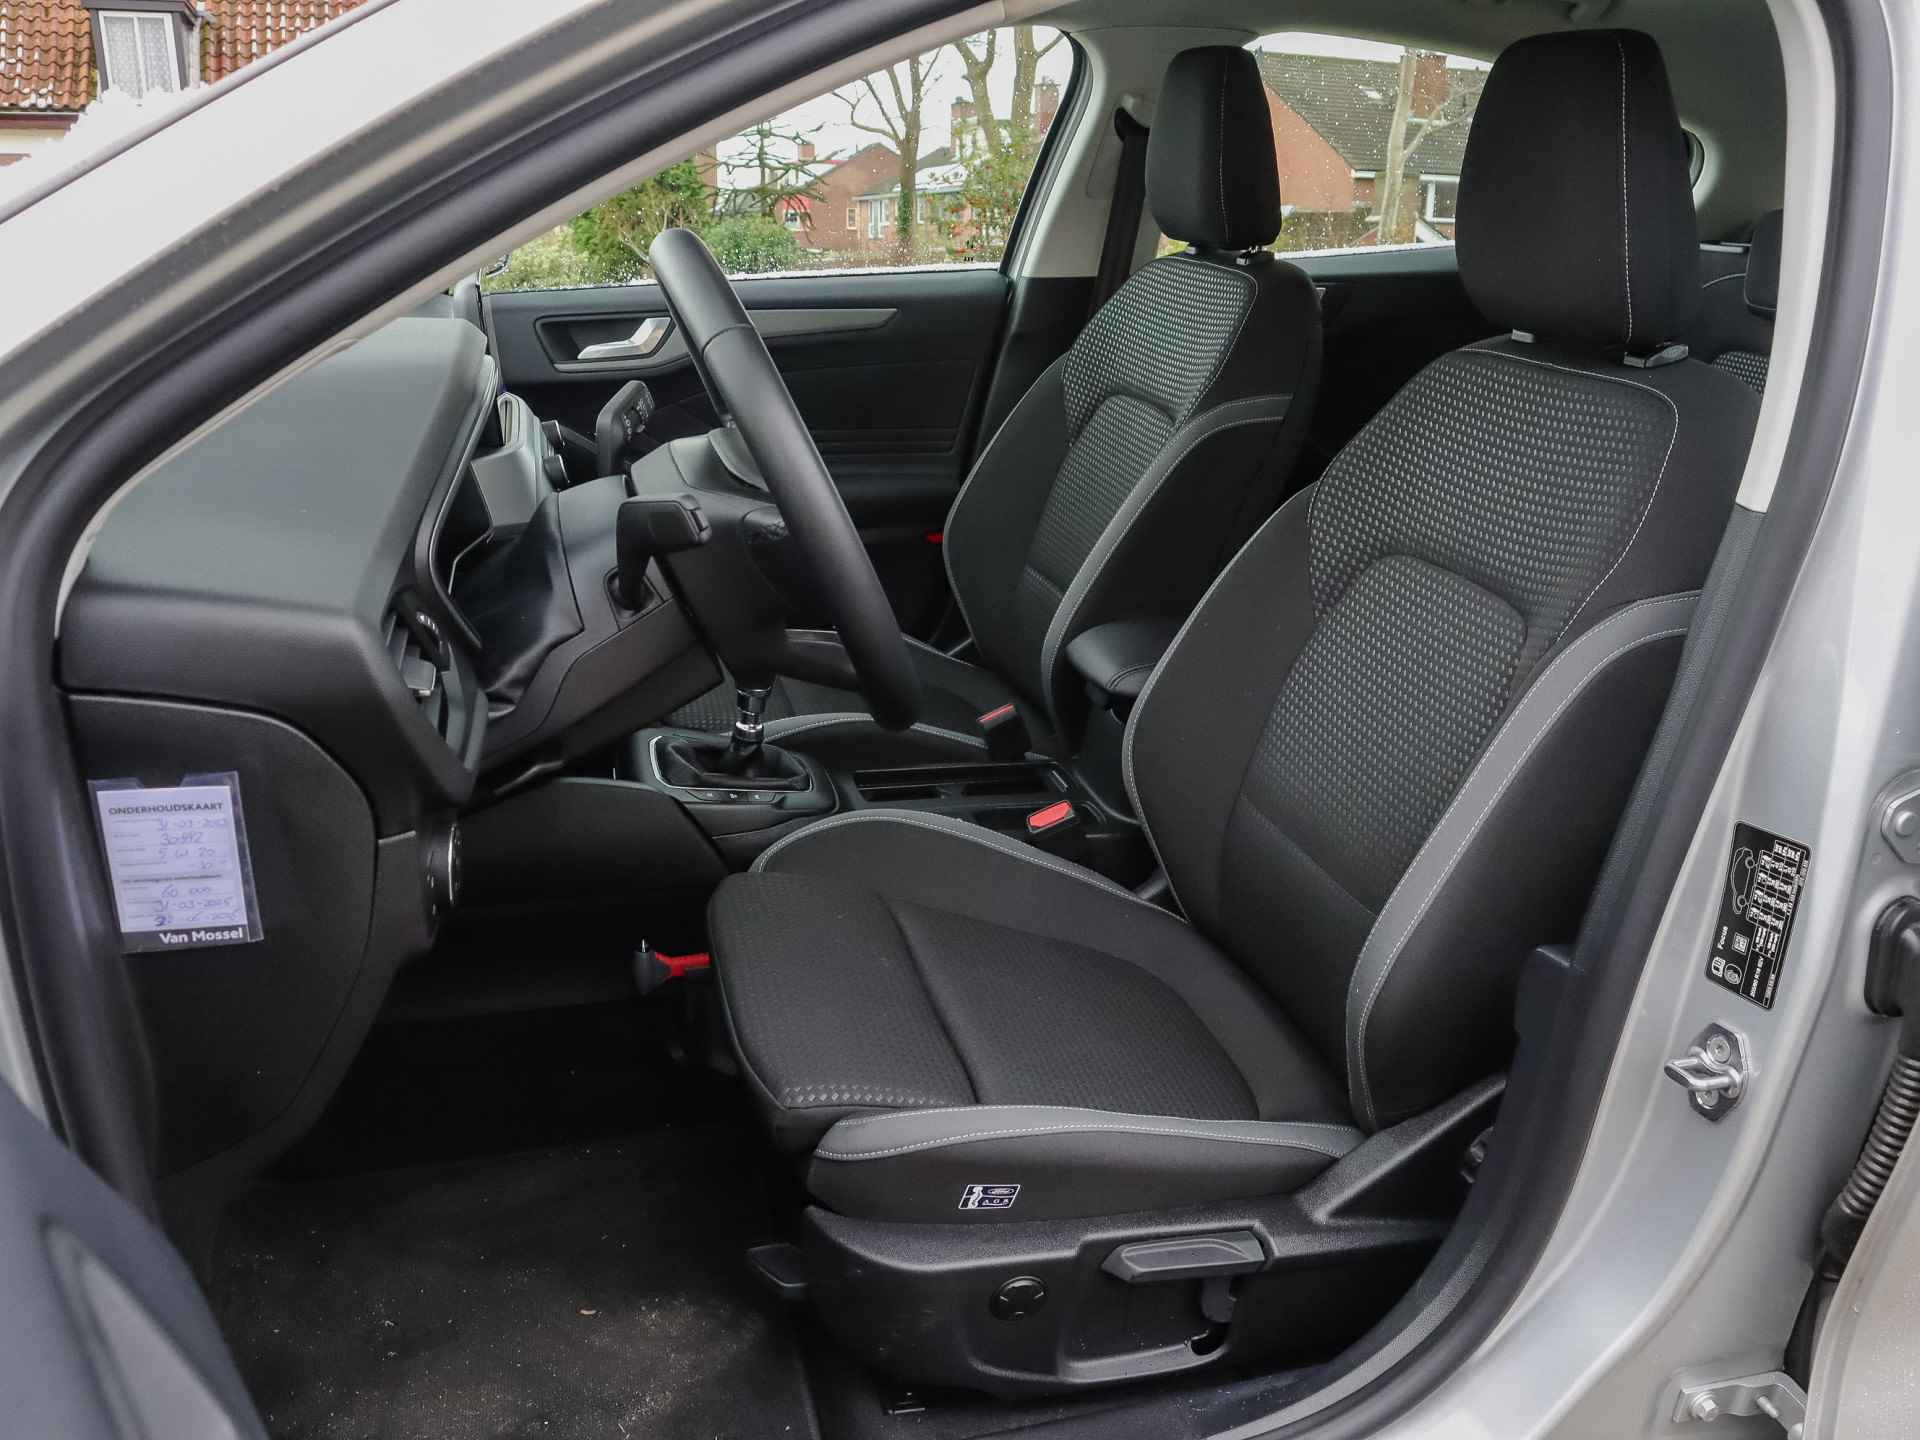 Ford Focus 1.0i Hybrid Connected, (149PK) 1e-Eig, Ford-Dealer-Onderh, 12-Mnd-BOVAG, NL-Auto, Navigatie/Apple-Carplay/Android-Auto, Parkeersensoren-V+A, Cruise-Control, Airco, DAB, Lane-Assist, Privacy-Glas, Sportstoelen, Led-Koplampen, Adaptieve-Cruise-Control - 10/55